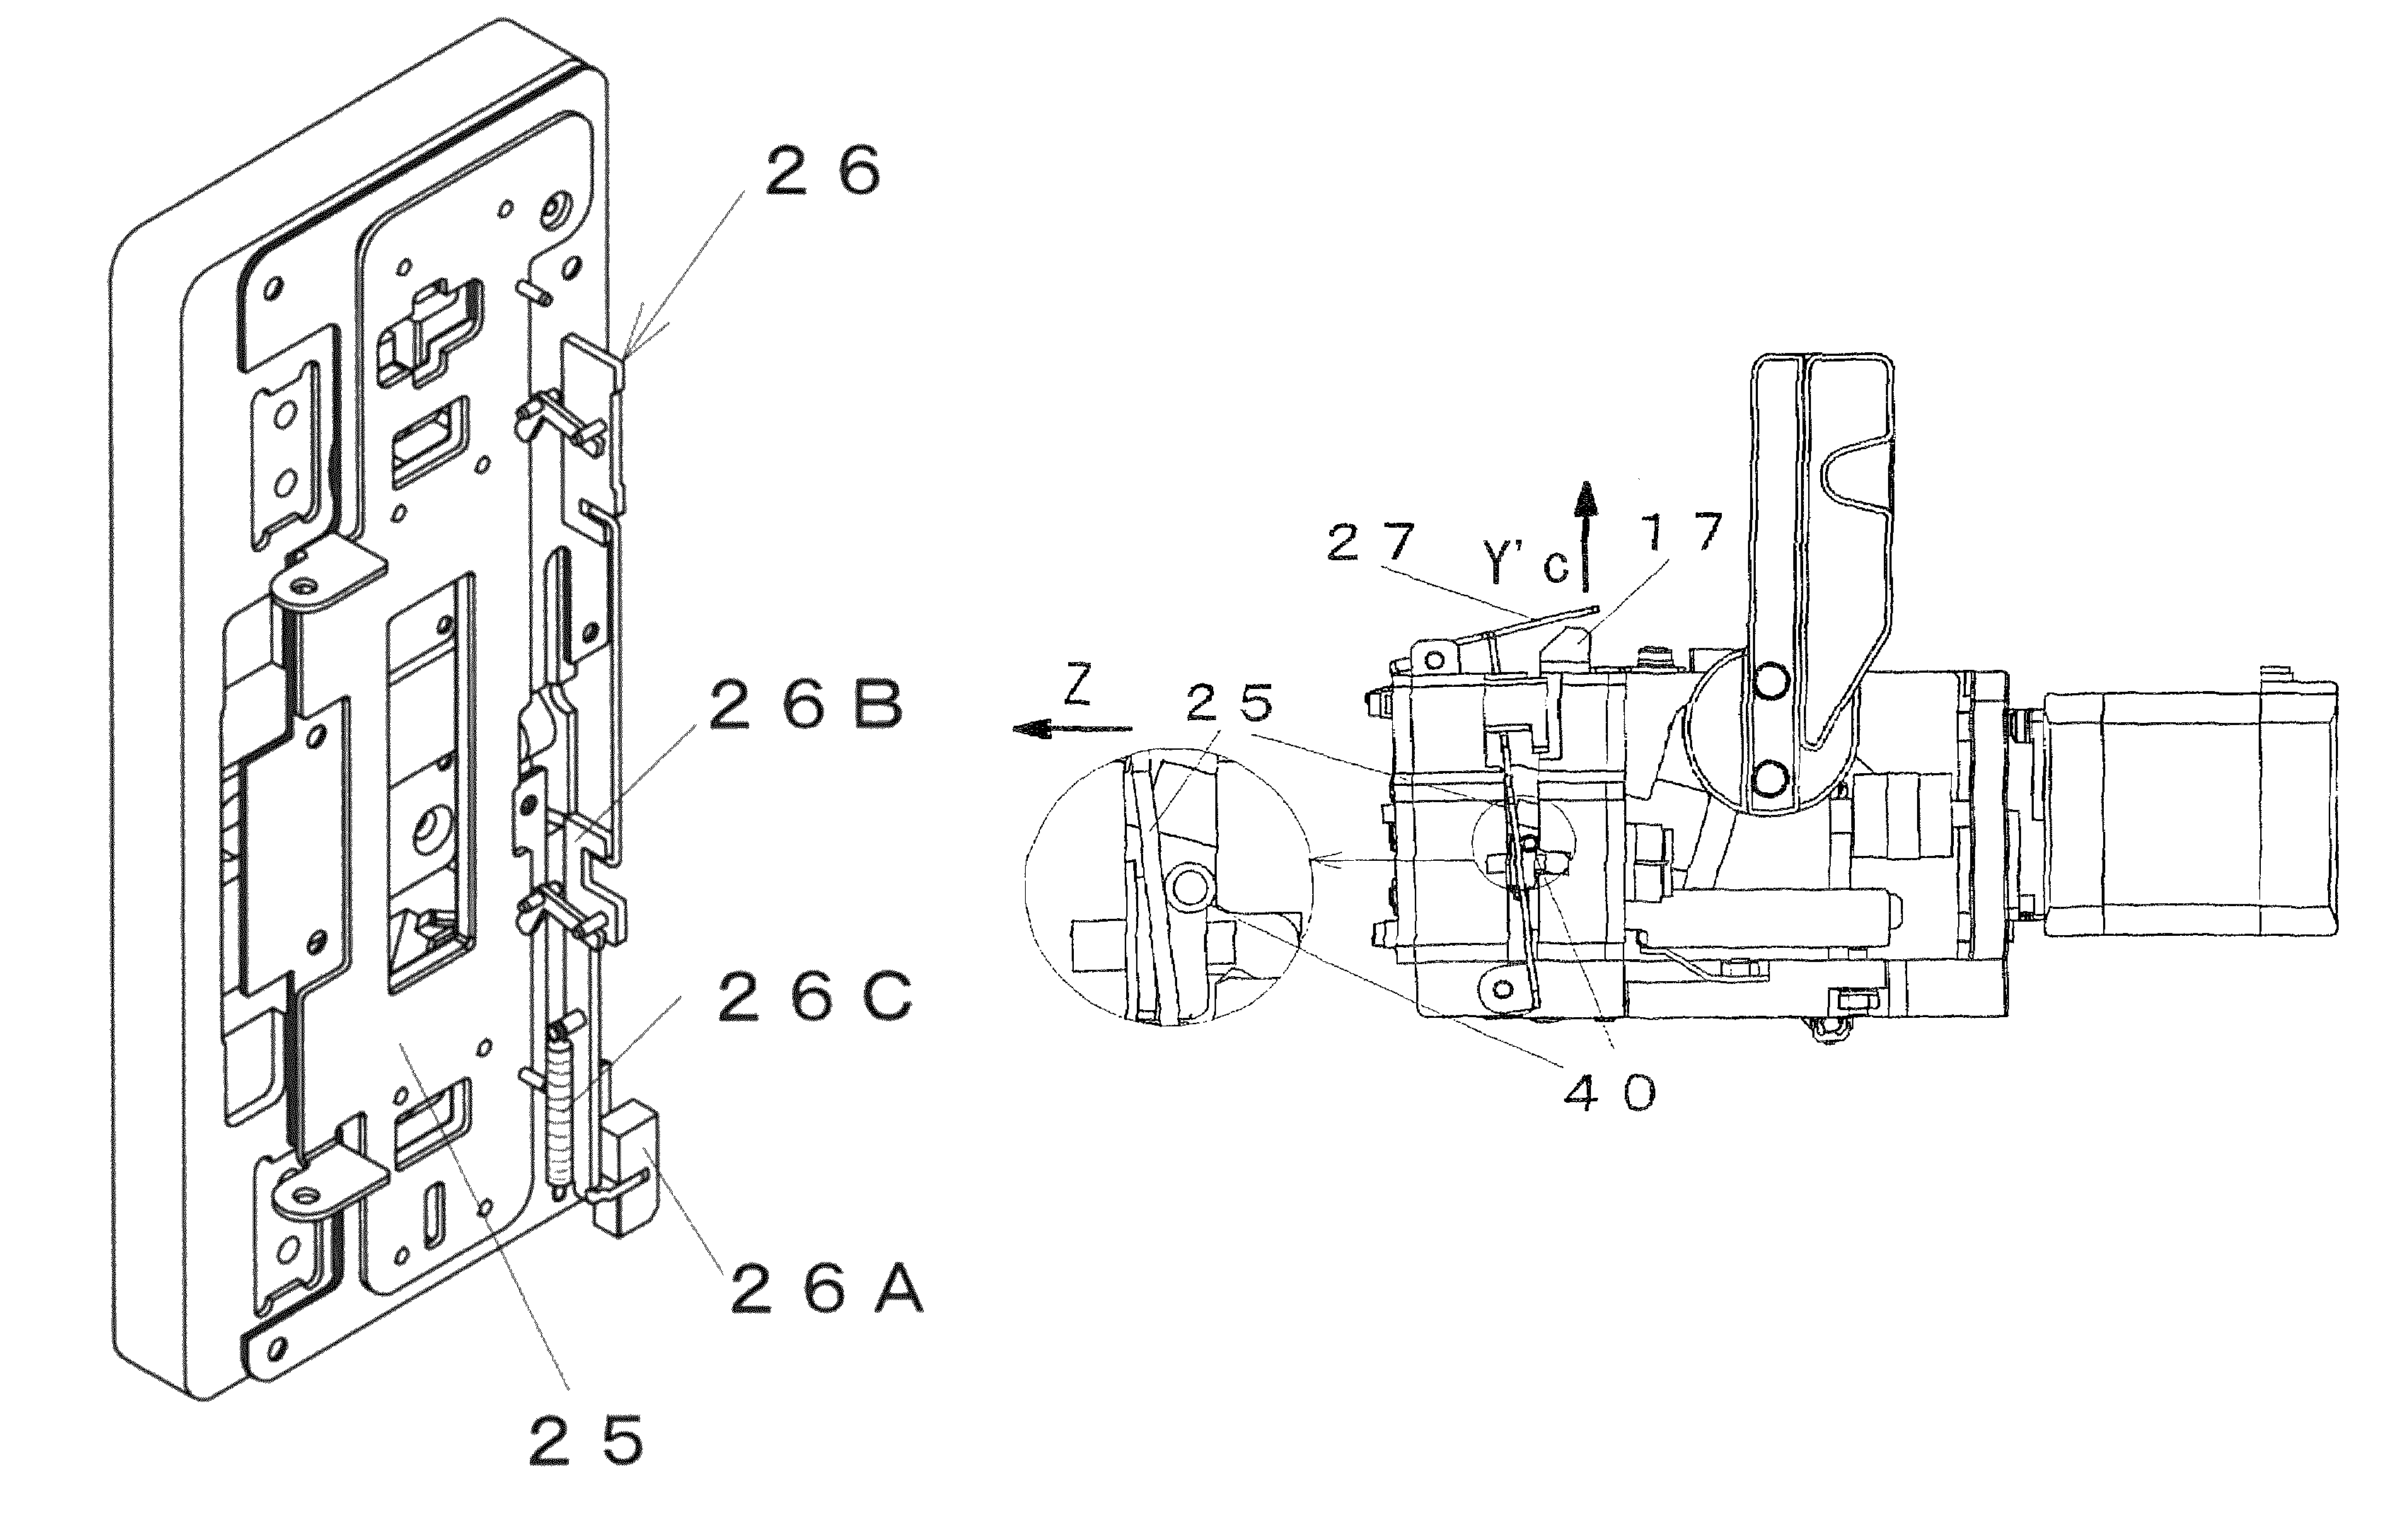 Tubing misload detection mechanism for an infusion pump